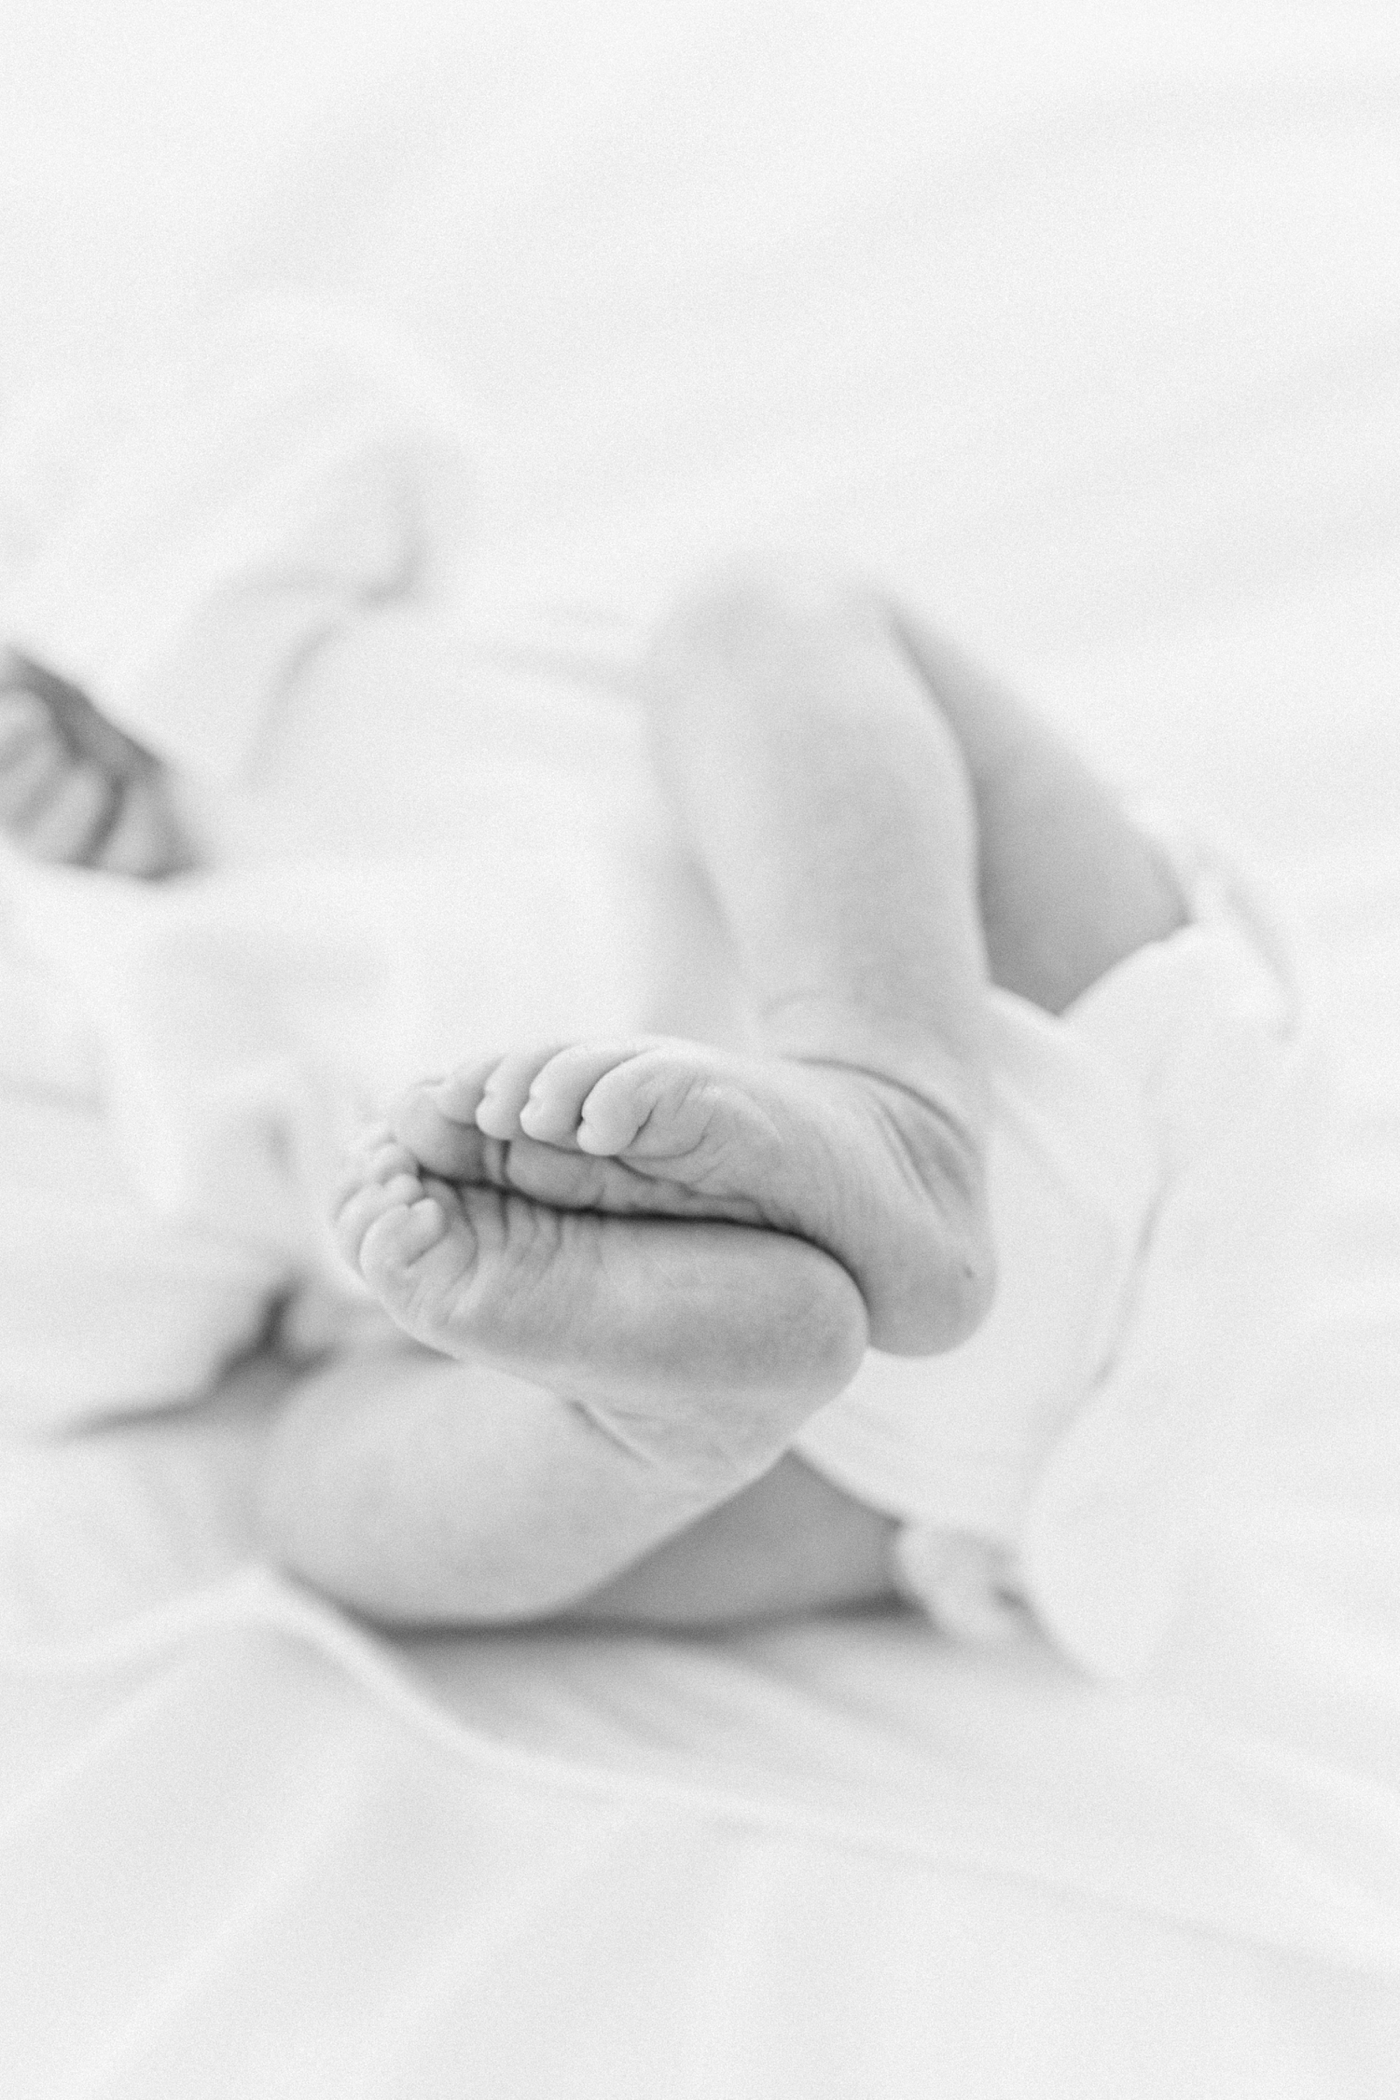 Black and white detail of newborn baby feet | Photo by Caitlyn Motycka Photography.